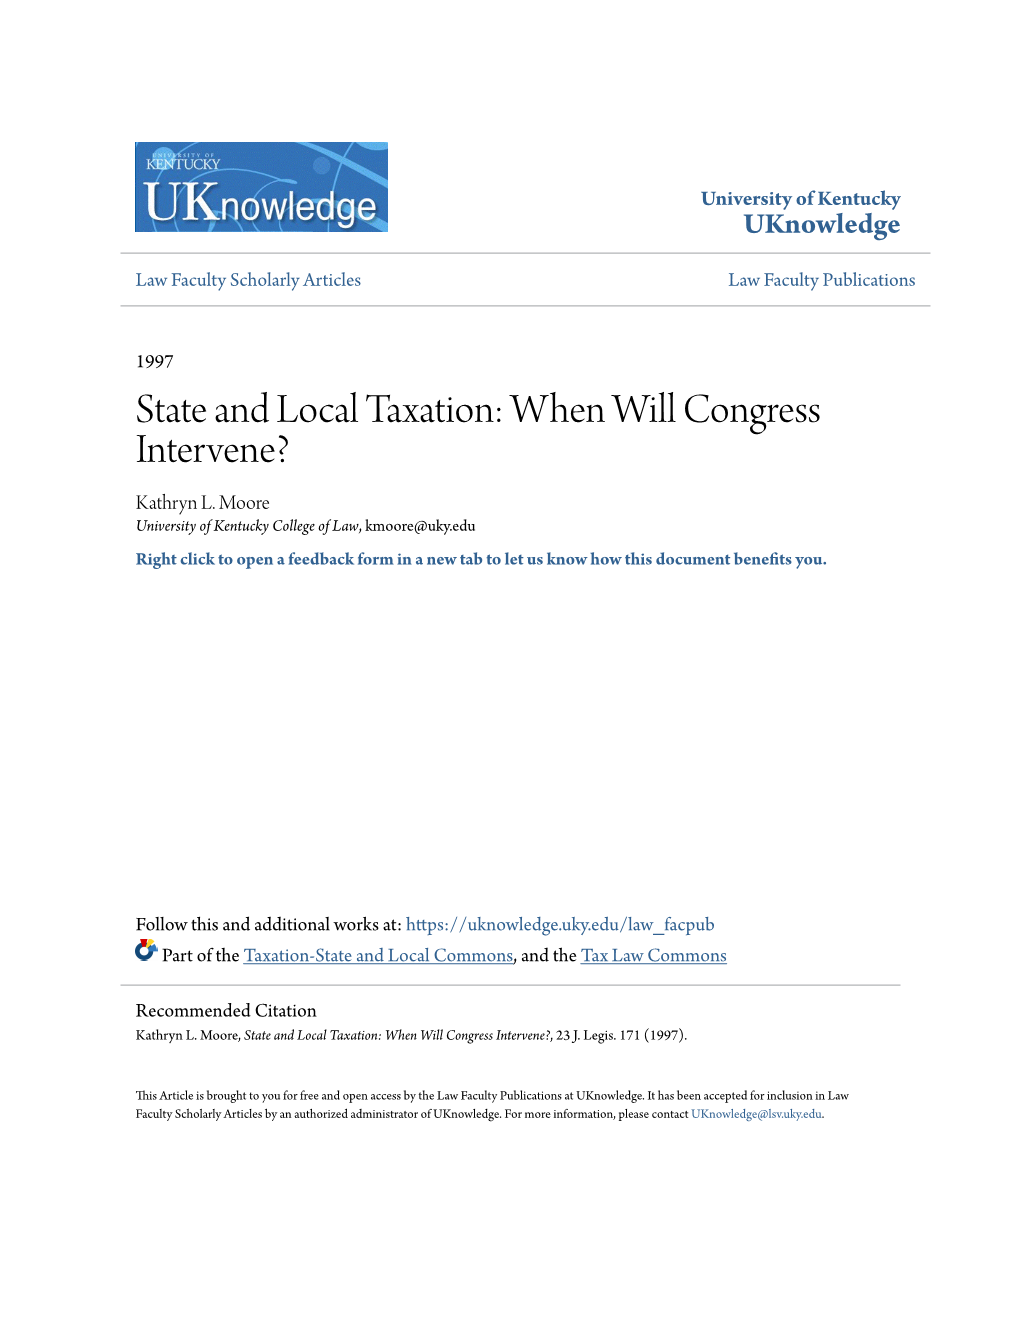 State and Local Taxation: When Will Congress Intervene? Kathryn L